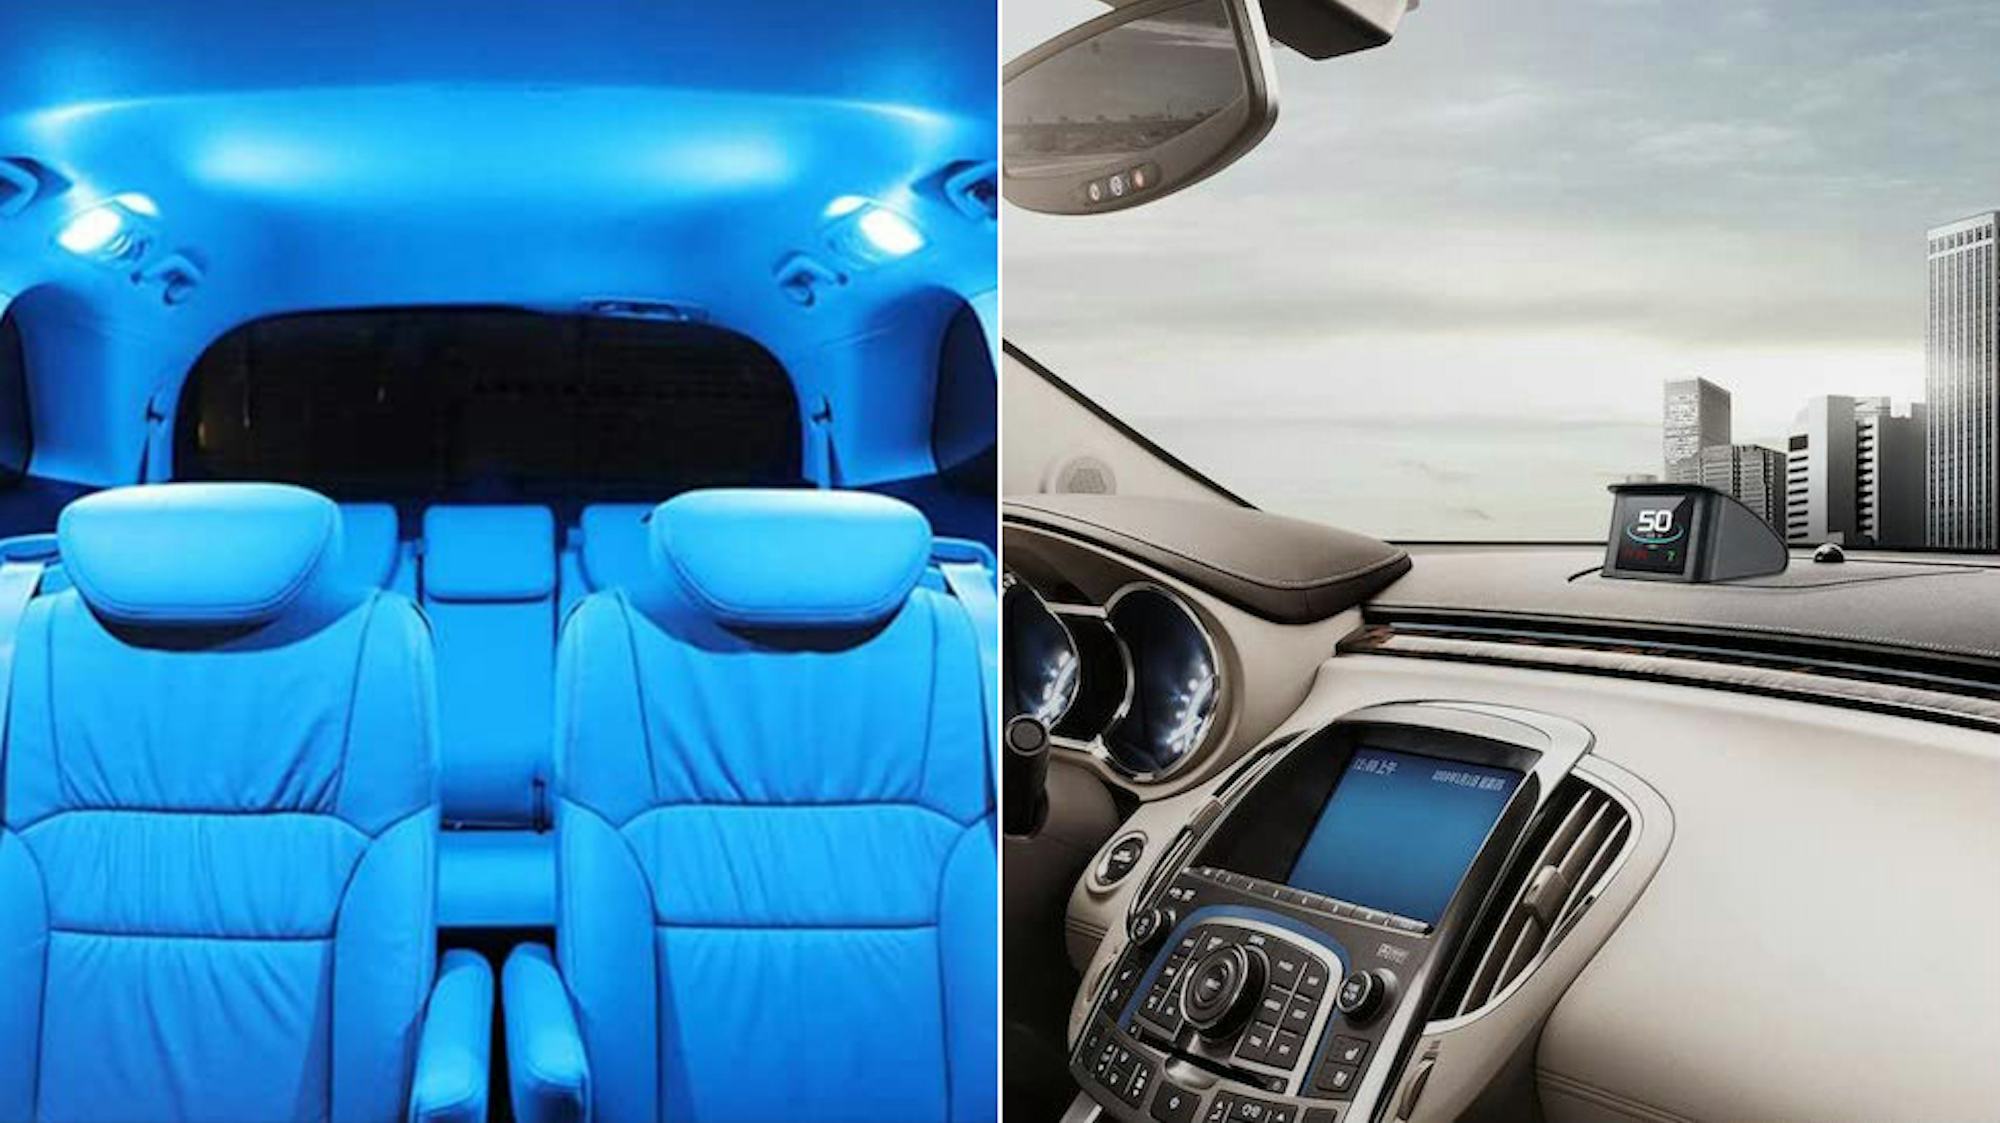 21 cool car gadgets that make driving SO much better